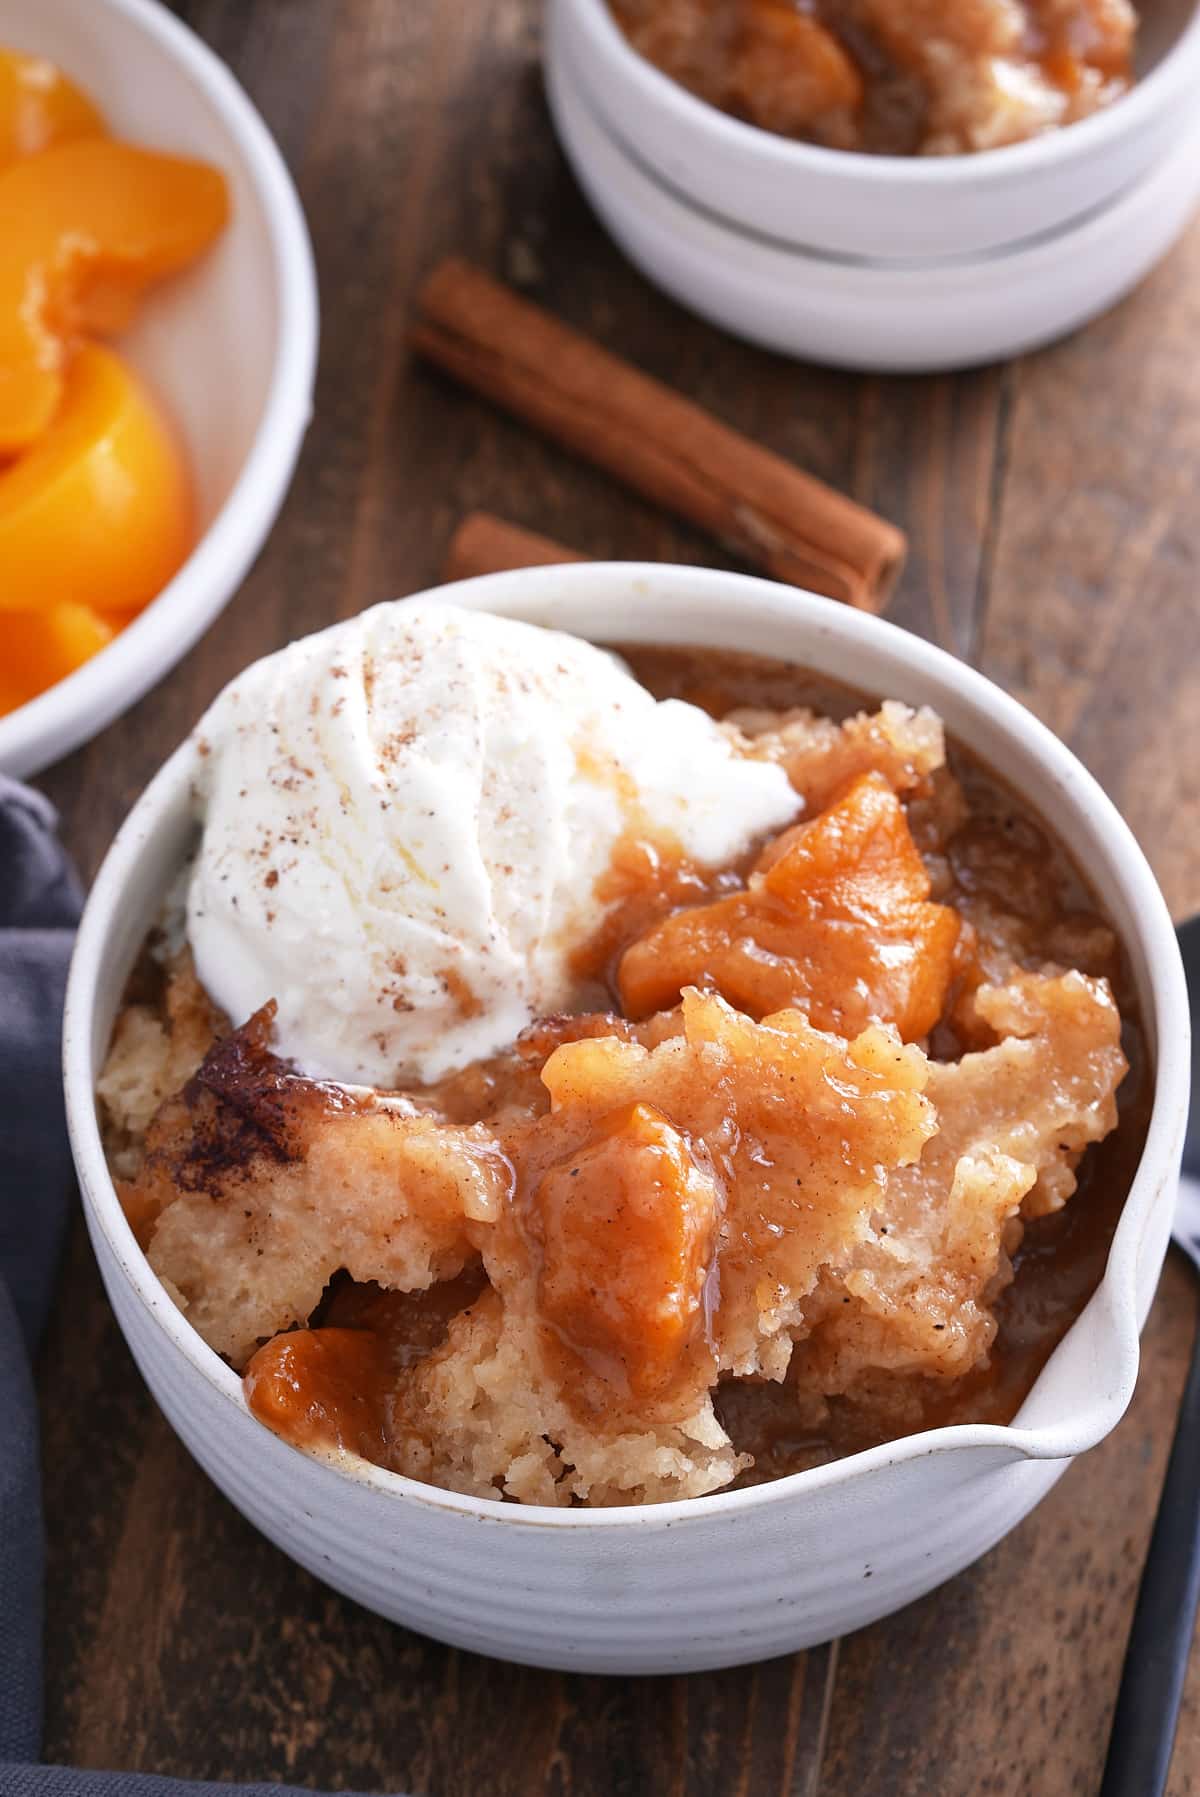 A serving of peach cobbler in a white bowl with ice cream.